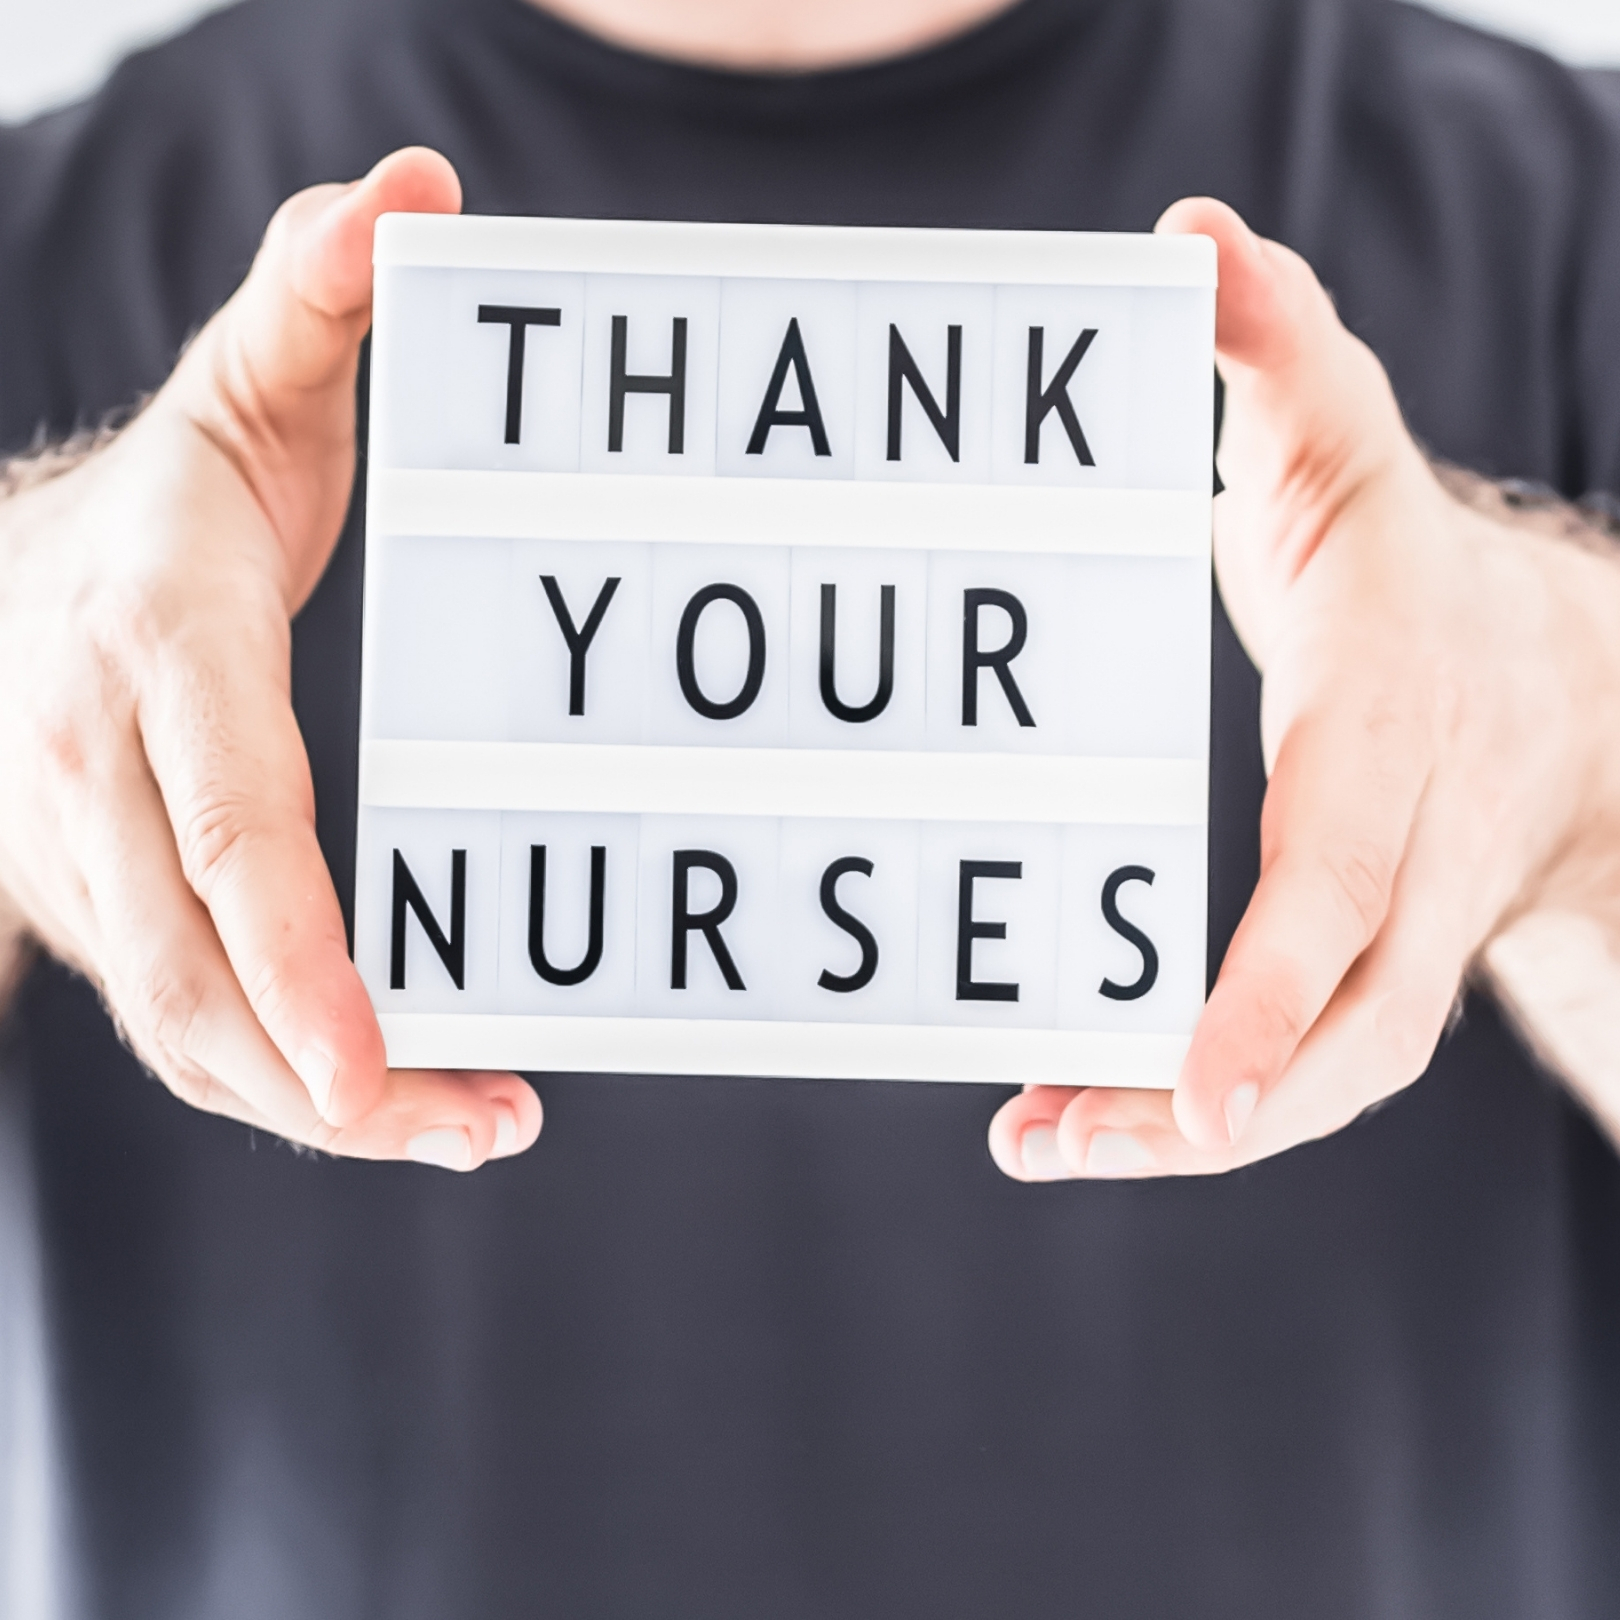 How to thank a nurse this Nurse’s Week and every day of the year